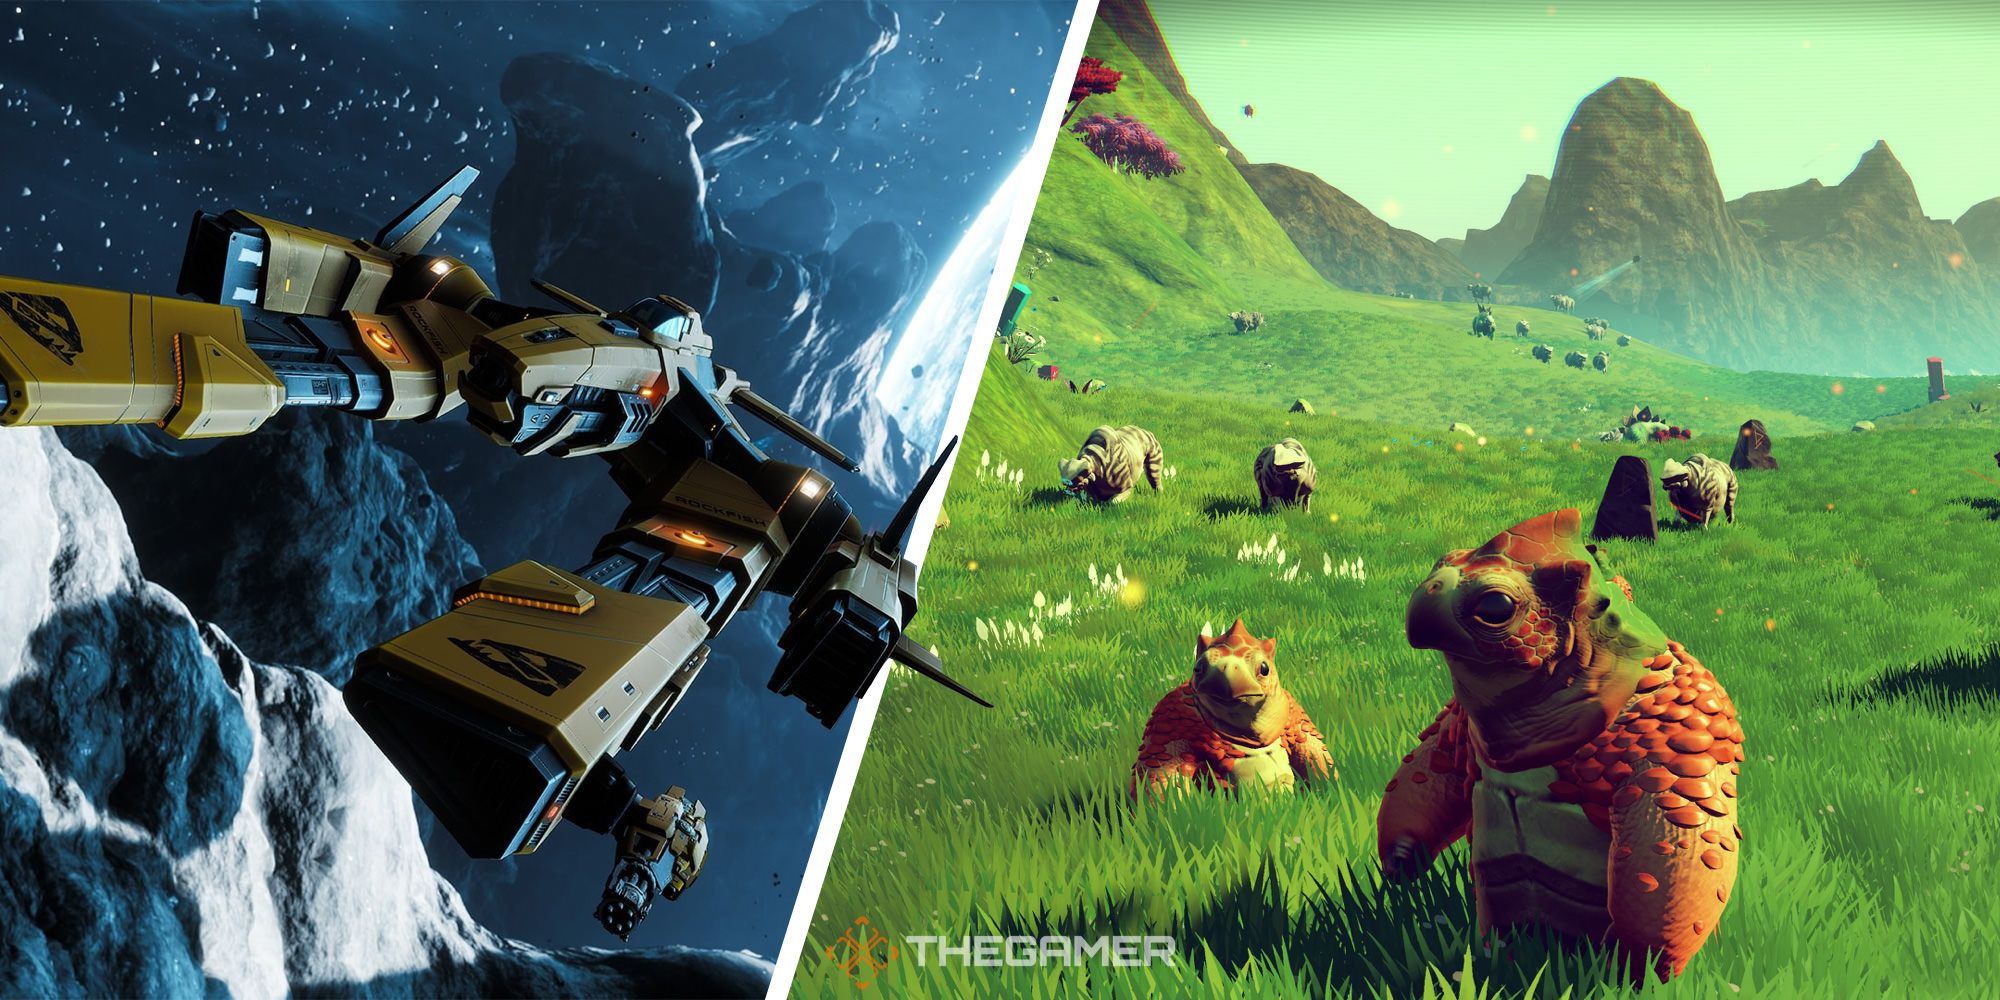 Split image of Everspace 2 and No Man's Sky